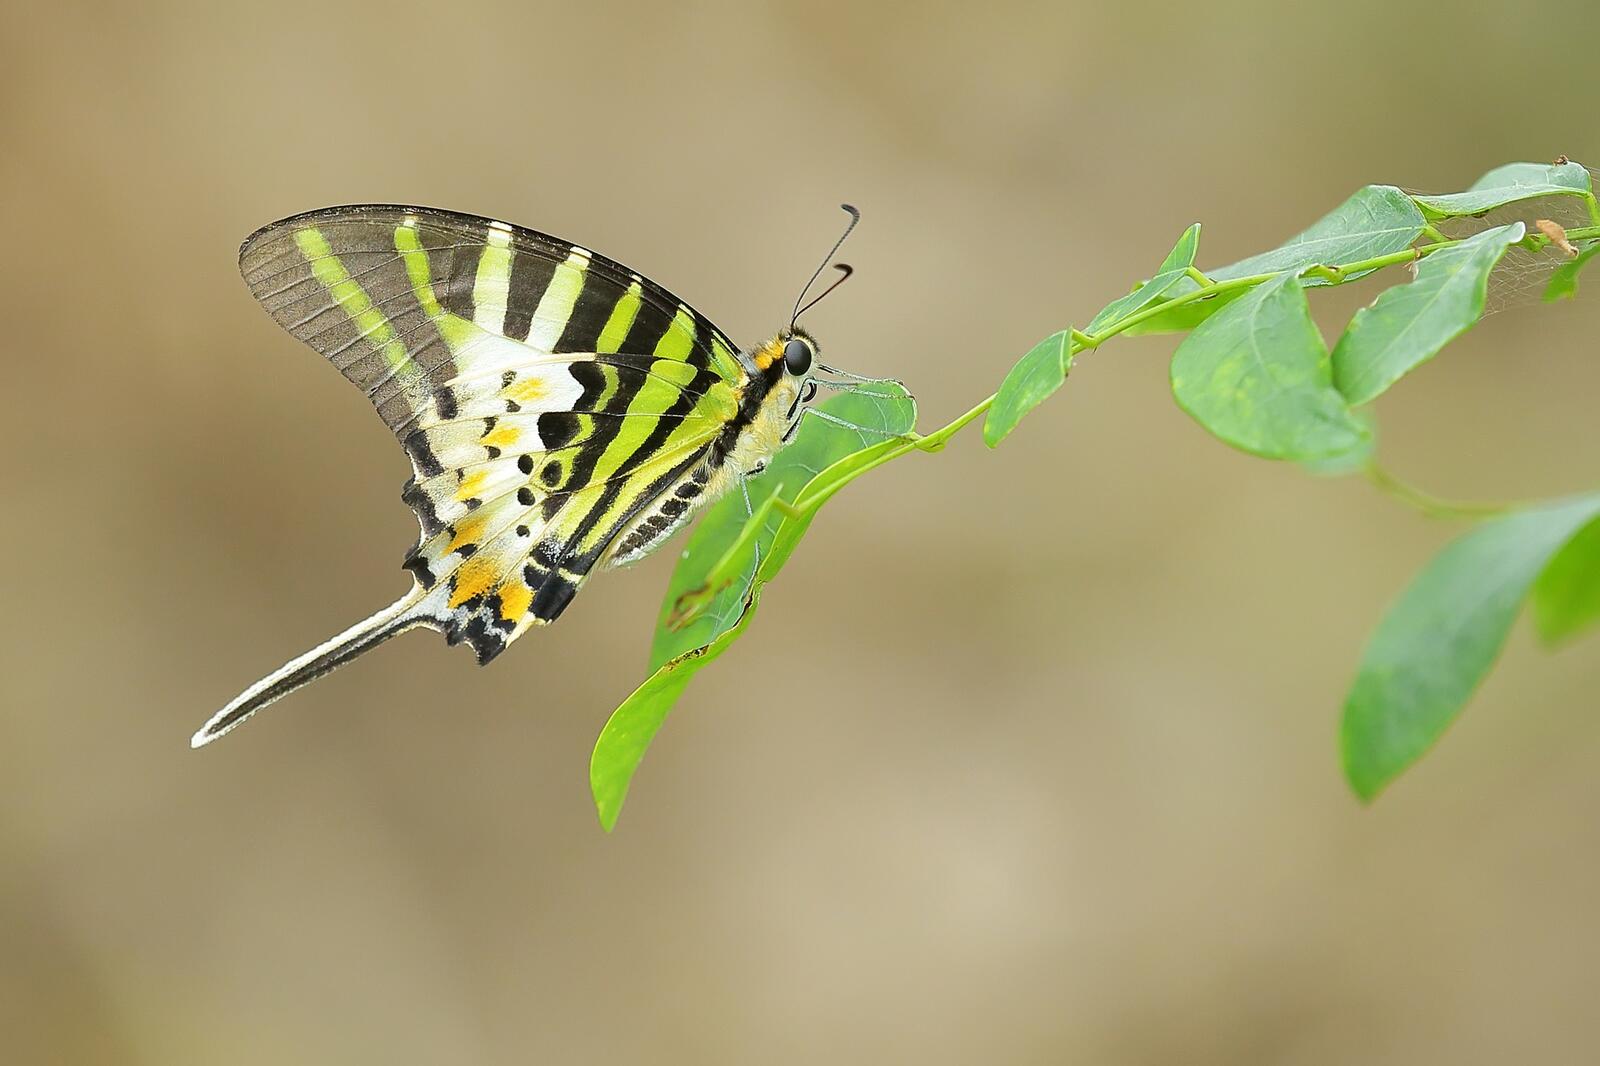 Wallpapers insect insects butterfly on the desktop